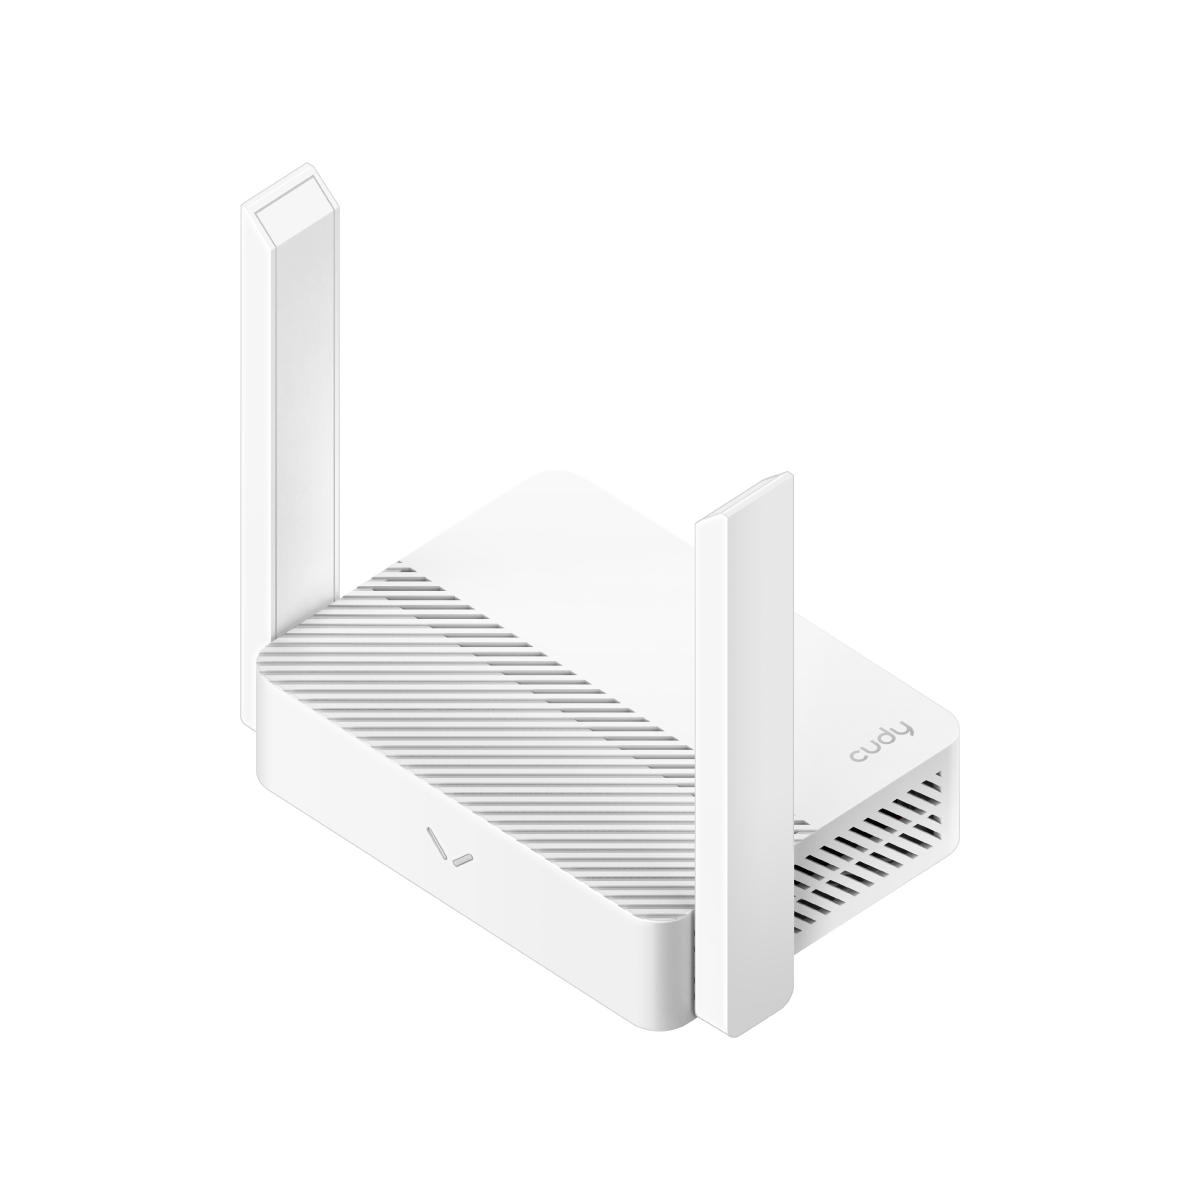 N300 Multi-Mode Wi-Fi Router, WR300 1.0